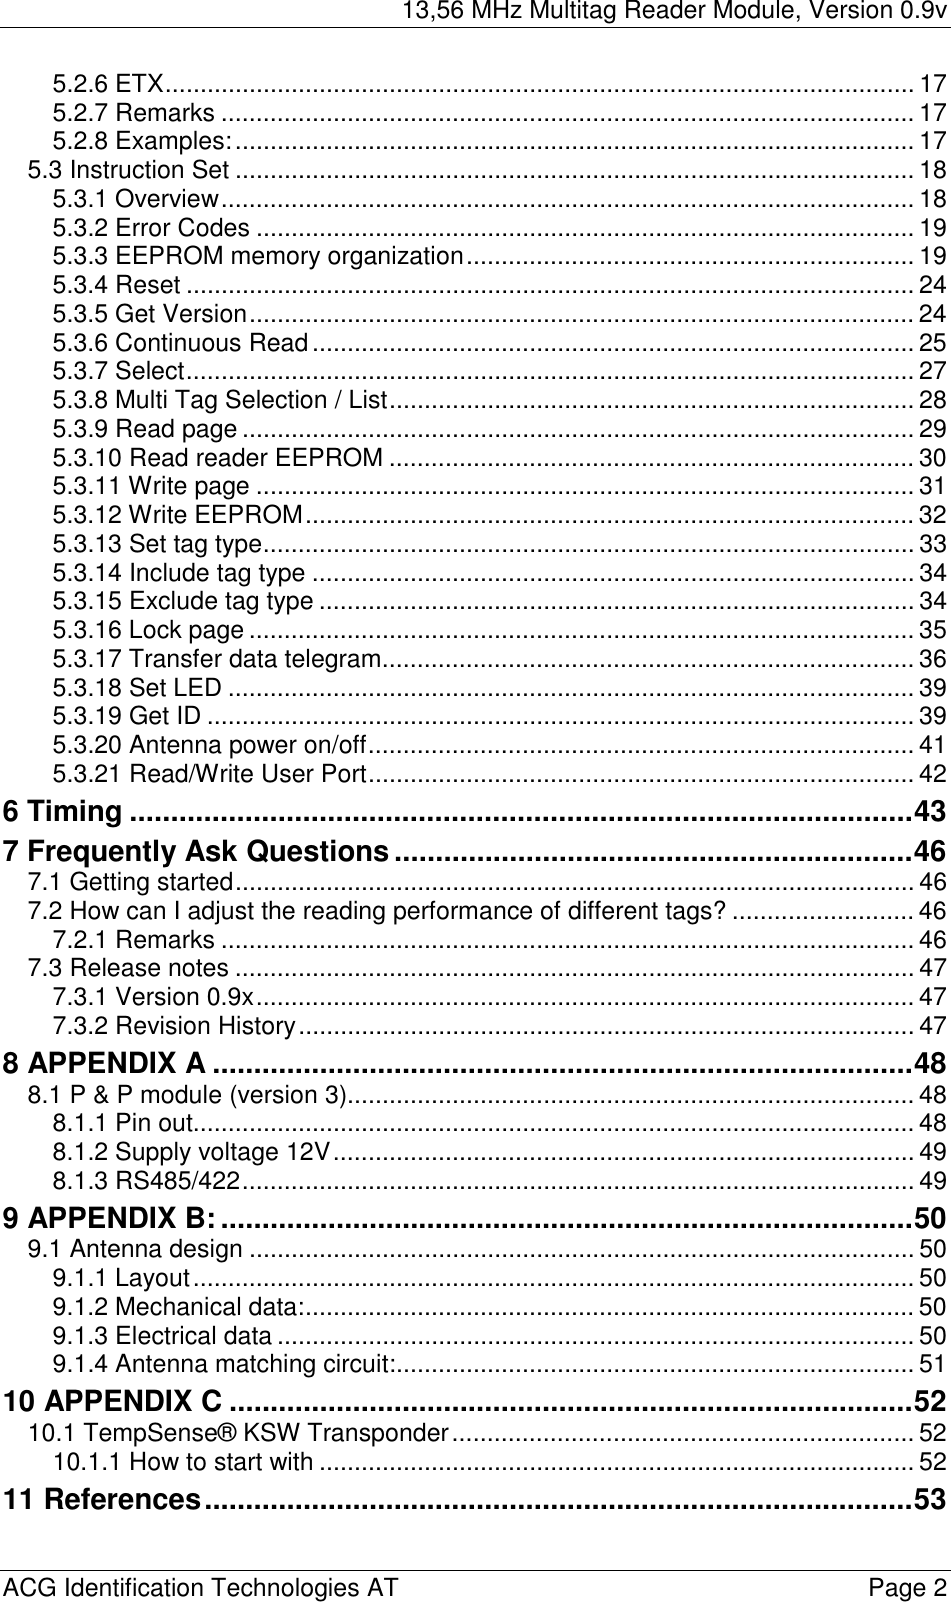 13,56 MHz Multitag Reader Module, Version 0.9v  ACG Identification Technologies AT    Page 2 5.2.6 ETX........................................................................................................... 17 5.2.7 Remarks ................................................................................................... 17 5.2.8 Examples:................................................................................................. 17 5.3 Instruction Set ................................................................................................. 18 5.3.1 Overview................................................................................................... 18 5.3.2 Error Codes .............................................................................................. 19 5.3.3 EEPROM memory organization................................................................ 19 5.3.4 Reset ........................................................................................................ 24 5.3.5 Get Version............................................................................................... 24 5.3.6 Continuous Read...................................................................................... 25 5.3.7 Select........................................................................................................ 27 5.3.8 Multi Tag Selection / List........................................................................... 28 5.3.9 Read page ................................................................................................ 29 5.3.10 Read reader EEPROM ........................................................................... 30 5.3.11 Write page .............................................................................................. 31 5.3.12 Write EEPROM....................................................................................... 32 5.3.13 Set tag type............................................................................................. 33 5.3.14 Include tag type ...................................................................................... 34 5.3.15 Exclude tag type ..................................................................................... 34 5.3.16 Lock page ............................................................................................... 35 5.3.17 Transfer data telegram............................................................................ 36 5.3.18 Set LED .................................................................................................. 39 5.3.19 Get ID ..................................................................................................... 39 5.3.20 Antenna power on/off.............................................................................. 41 5.3.21 Read/Write User Port.............................................................................. 42 6 Timing ...............................................................................................43 7 Frequently Ask Questions...............................................................46 7.1 Getting started................................................................................................. 46 7.2 How can I adjust the reading performance of different tags? .......................... 46 7.2.1 Remarks ................................................................................................... 46 7.3 Release notes ................................................................................................. 47 7.3.1 Version 0.9x.............................................................................................. 47 7.3.2 Revision History........................................................................................ 47 8 APPENDIX A .....................................................................................48 8.1 P &amp; P module (version 3)................................................................................. 48 8.1.1 Pin out....................................................................................................... 48 8.1.2 Supply voltage 12V................................................................................... 49 8.1.3 RS485/422................................................................................................ 49 9 APPENDIX B:....................................................................................50 9.1 Antenna design ............................................................................................... 50 9.1.1 Layout....................................................................................................... 50 9.1.2 Mechanical data:....................................................................................... 50 9.1.3 Electrical data ........................................................................................... 50 9.1.4 Antenna matching circuit:.......................................................................... 51 10 APPENDIX C ...................................................................................52 10.1 TempSense® KSW Transponder.................................................................. 52 10.1.1 How to start with ..................................................................................... 52 11 References......................................................................................53  